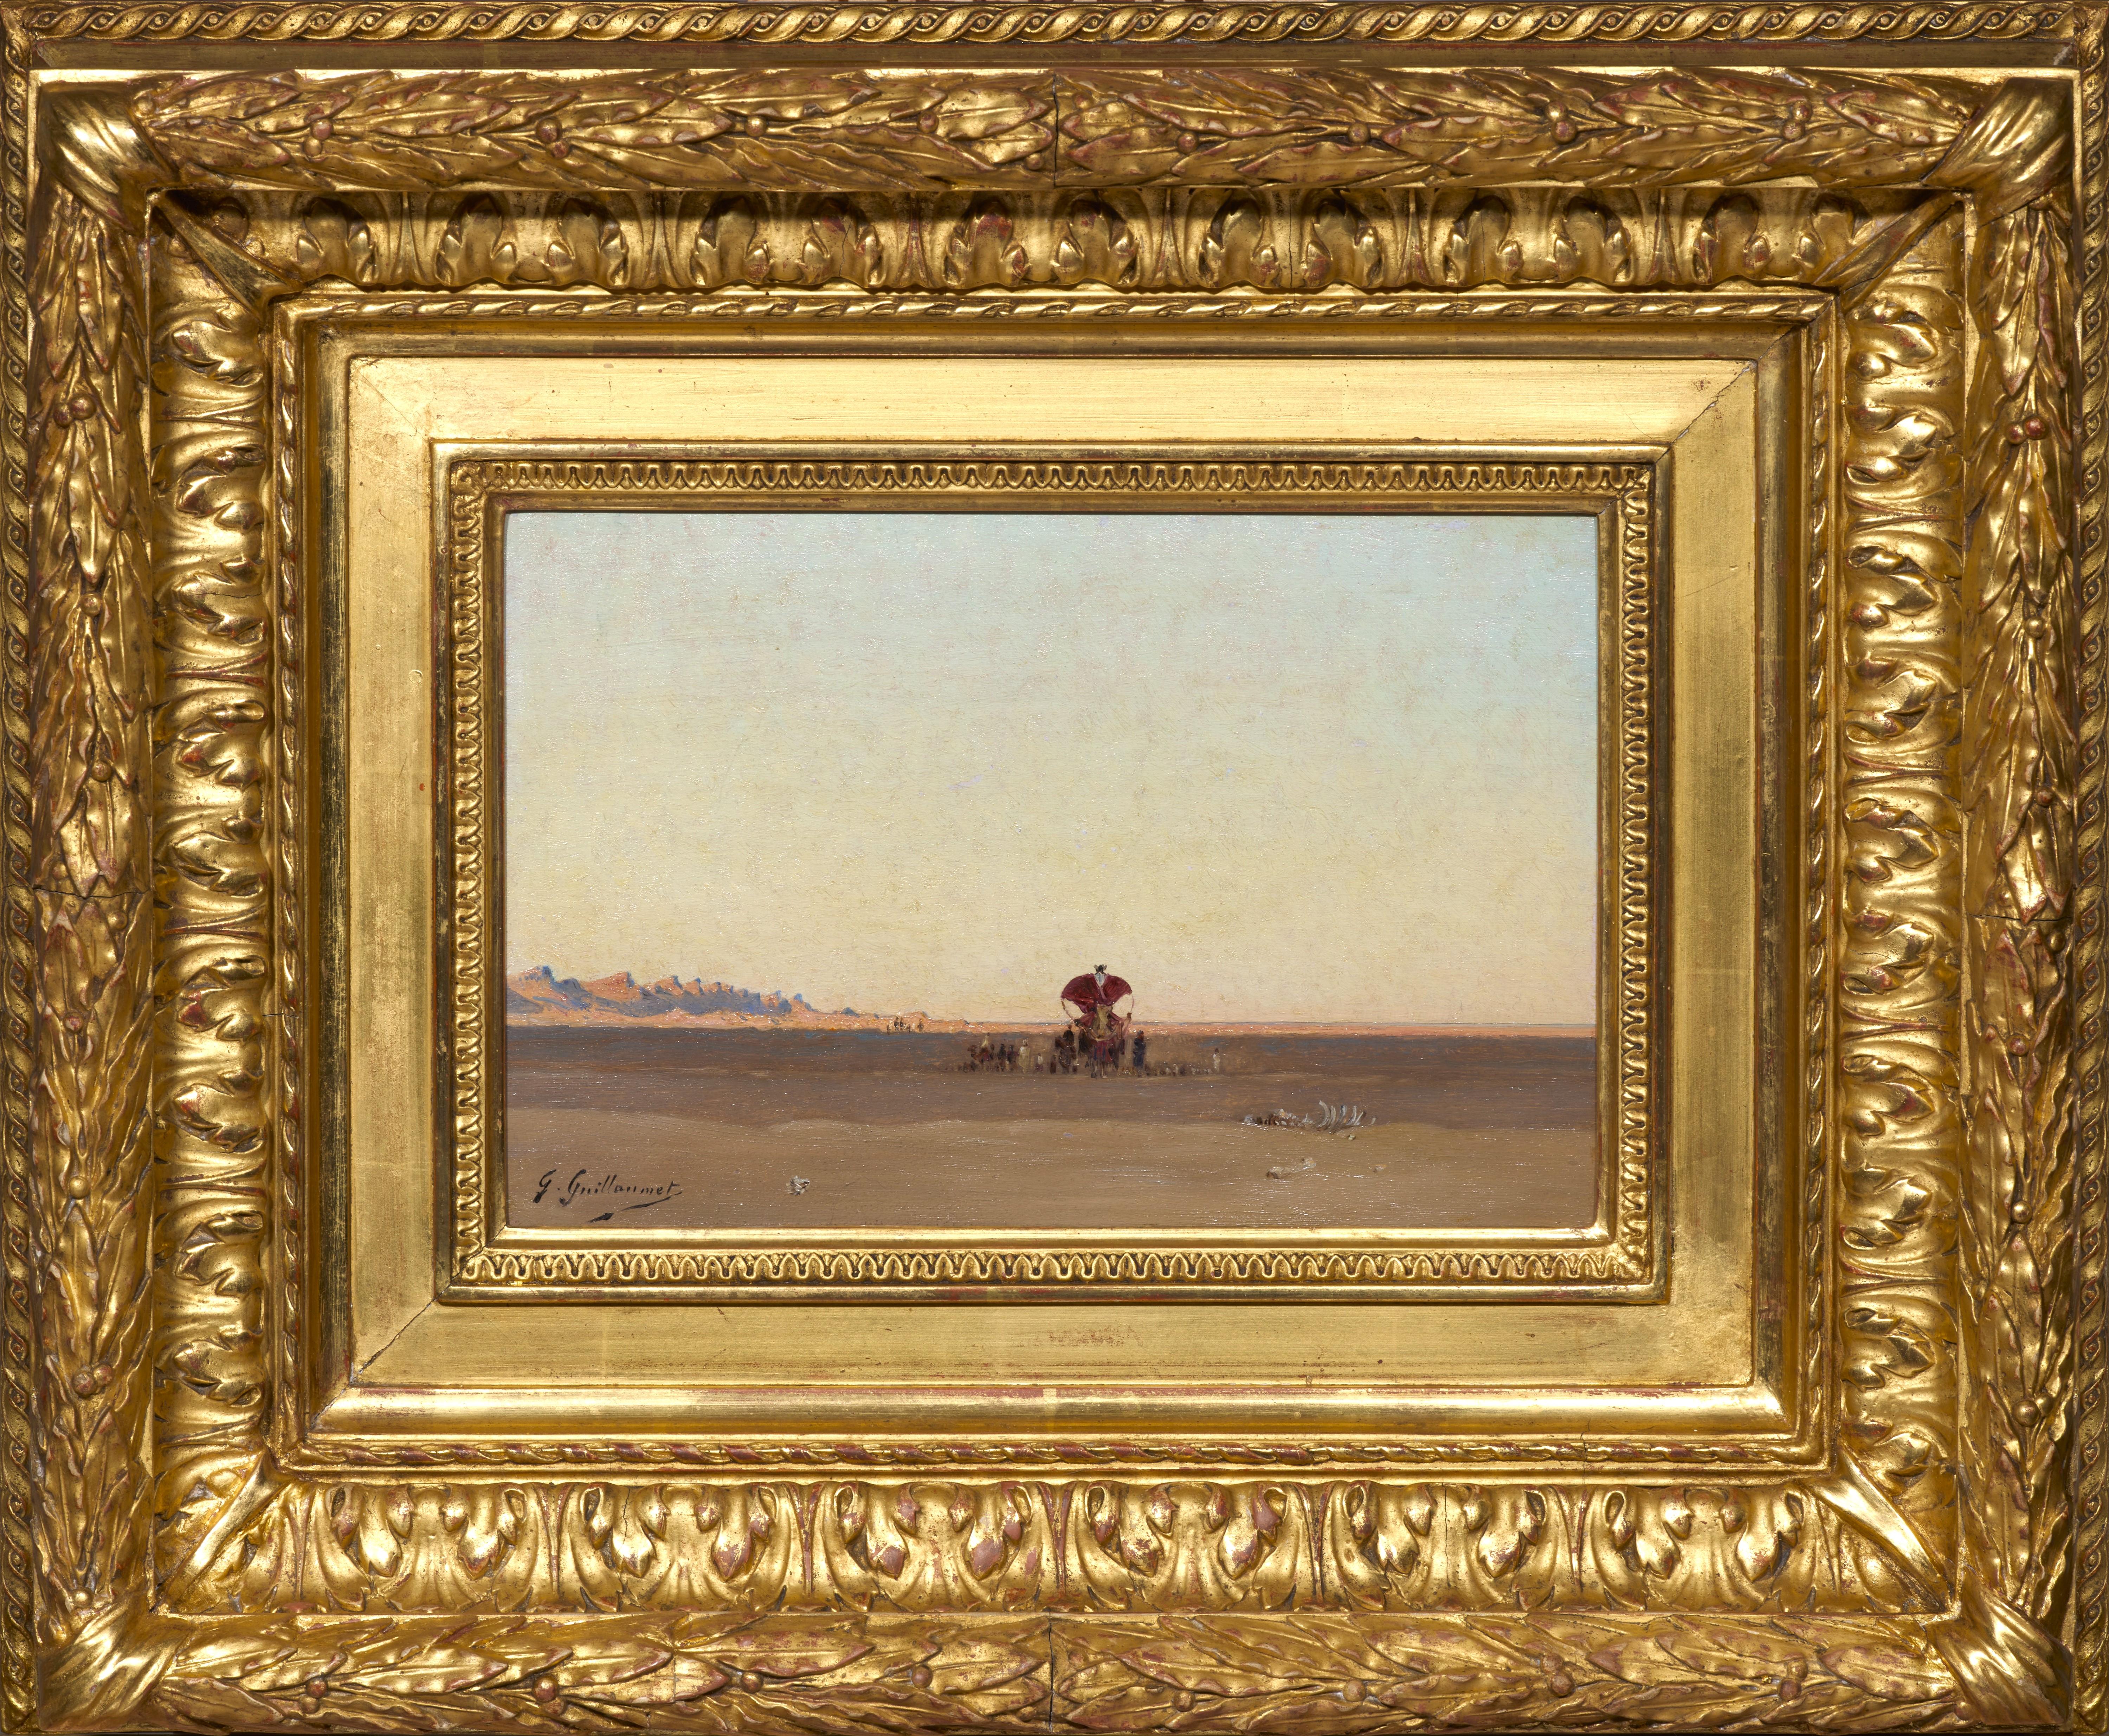 In this panel, painted during his stay in 1877 - 1878 in Laghouat, 400 kilometers south of Algiers, at the gateway to the Sahara Desert, Gustave Guillaumet tackles several of his favorite themes: the immensity of the desert, magnified by its